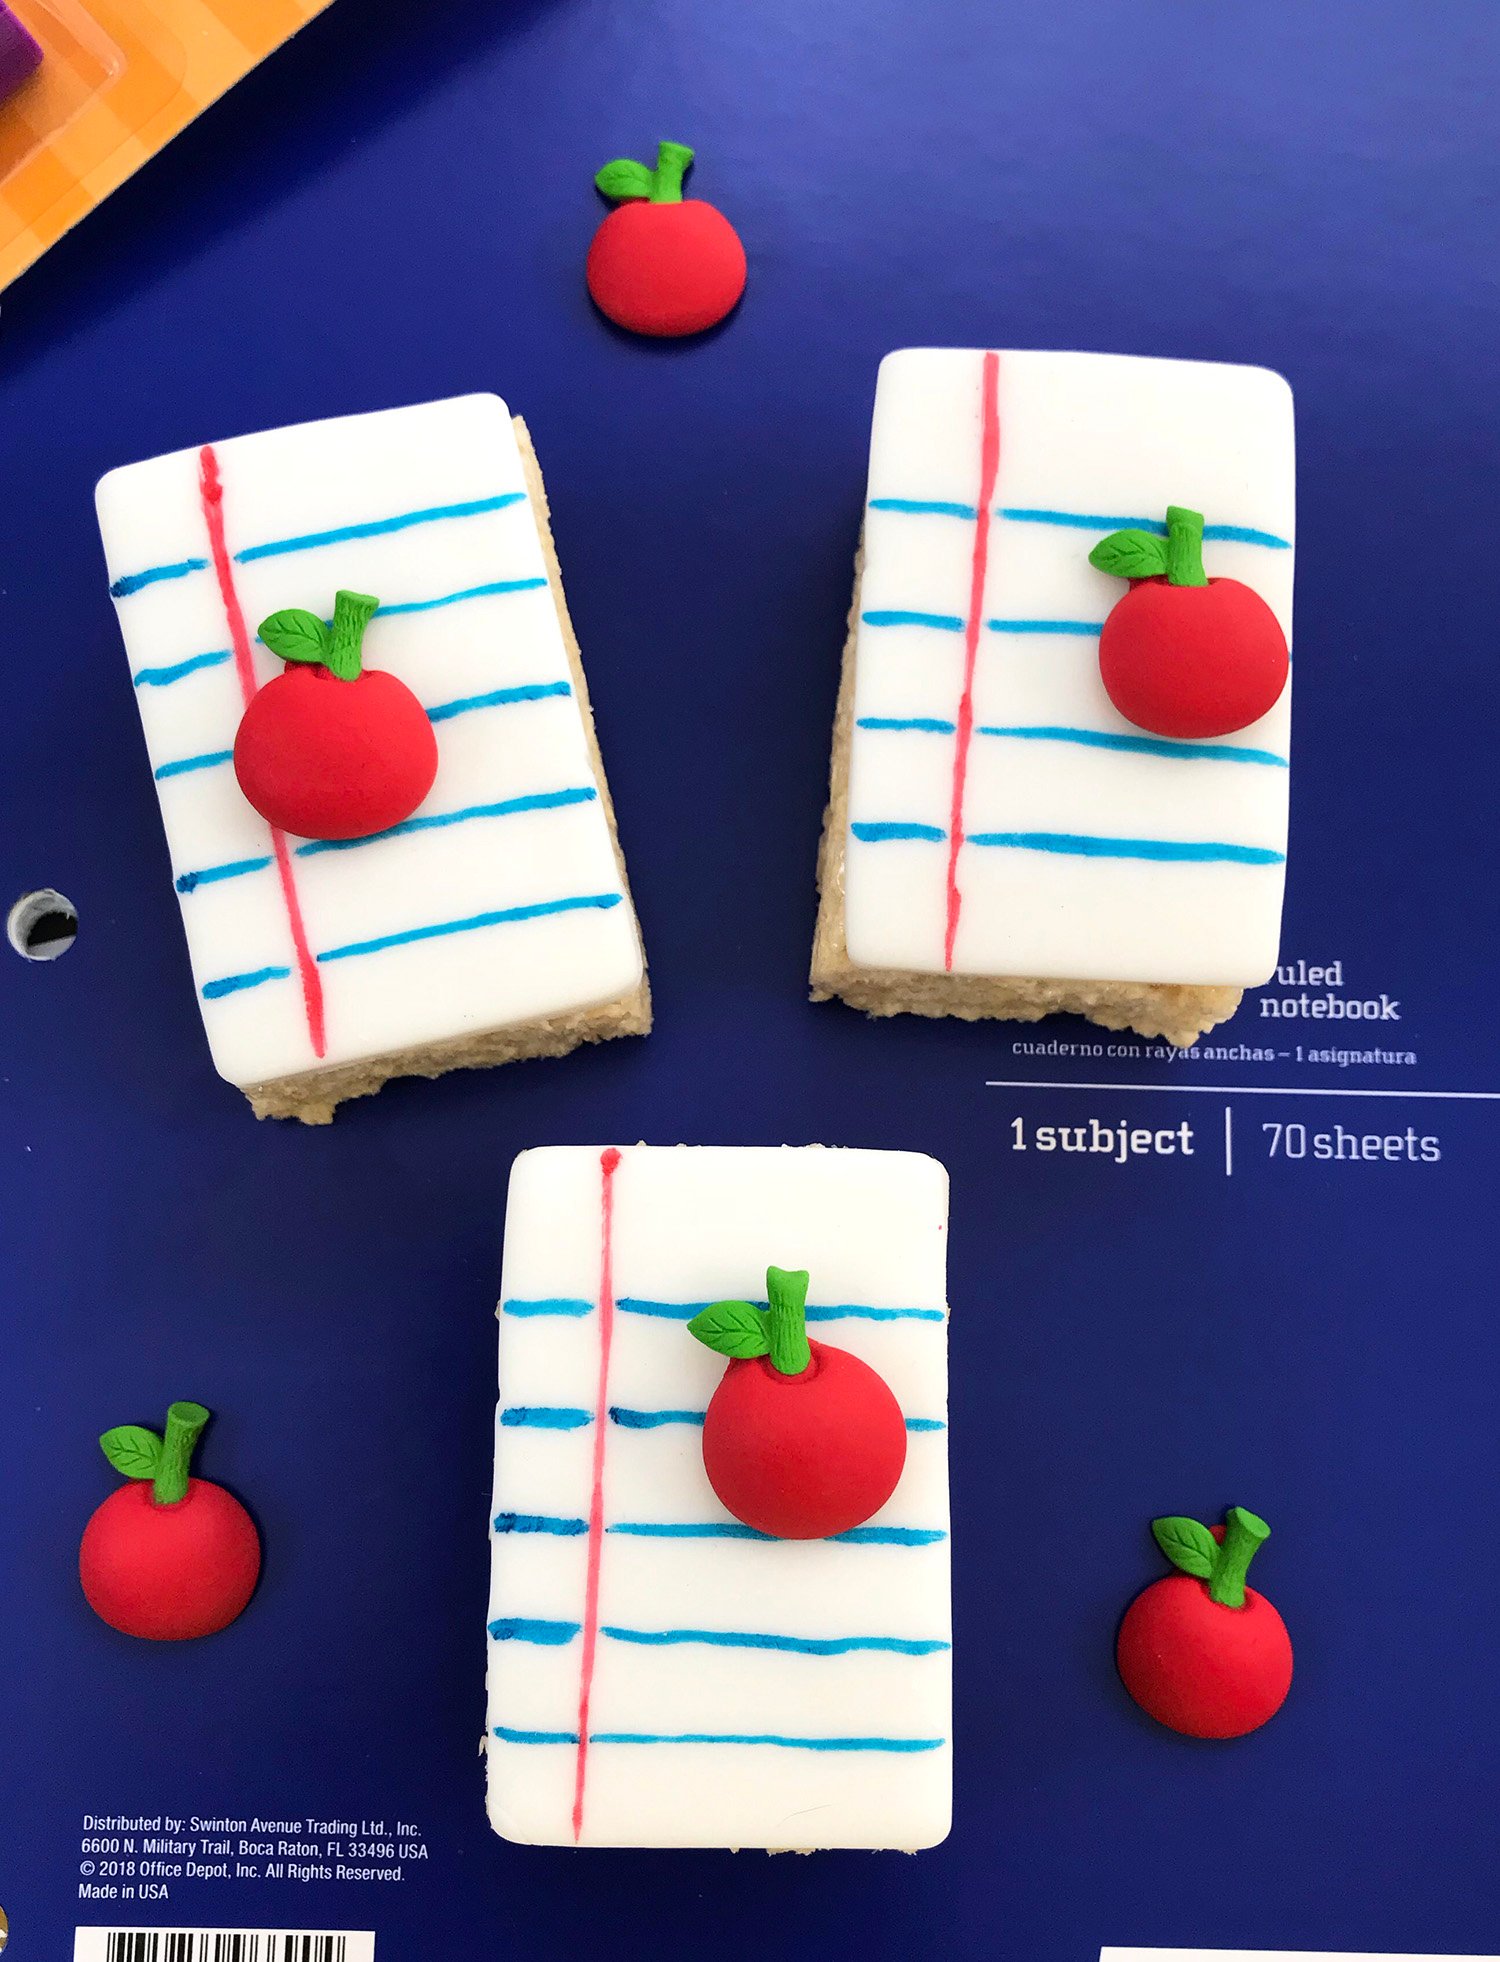 back to school rice krispie treats that look like binder paper with apples on them